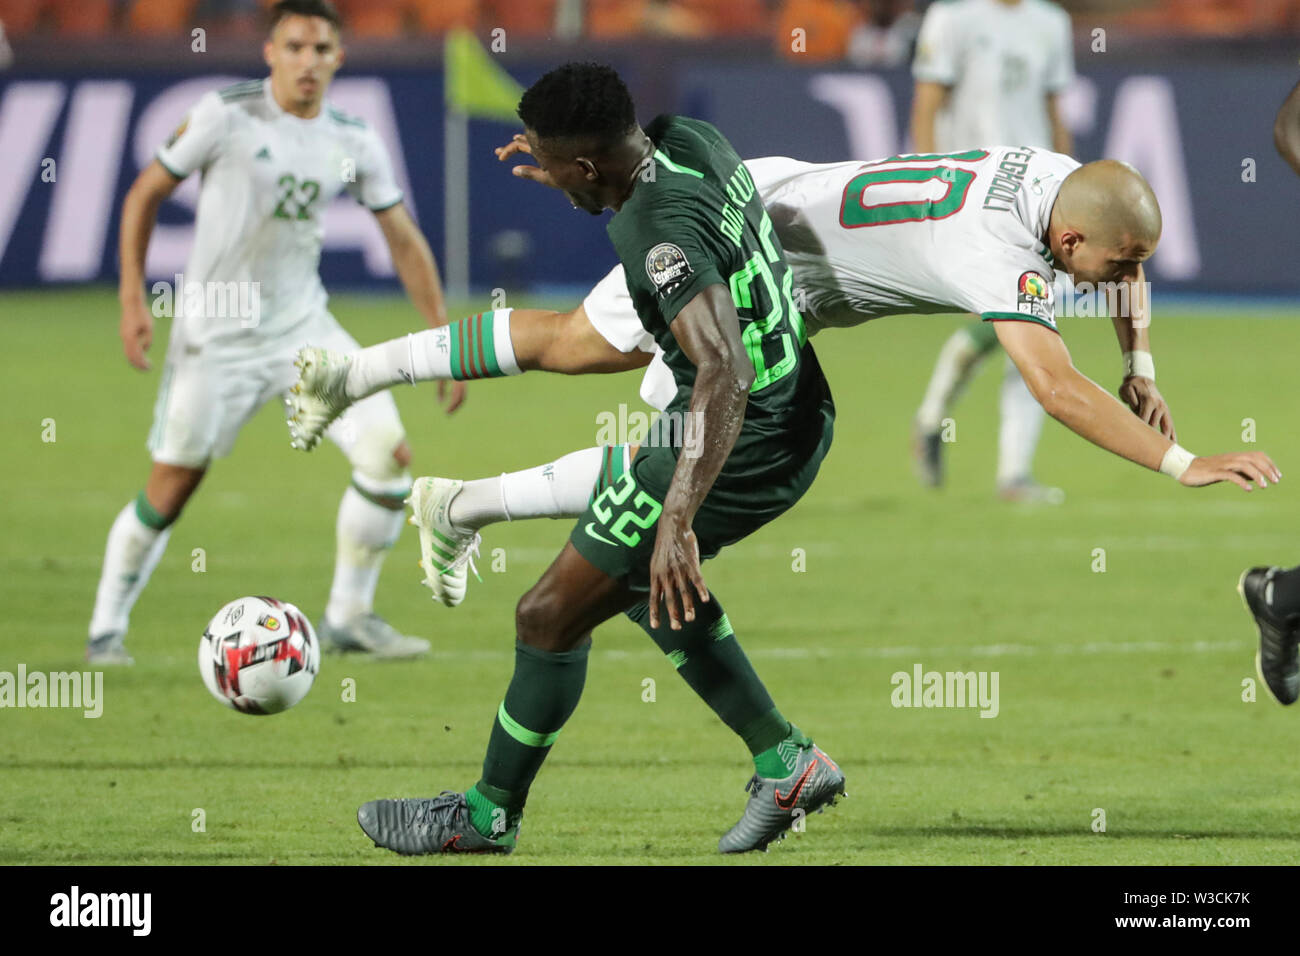 Cairo, Egypt. 14th July, 2019. Algeria's Sofiane Feghouli (top) and Nigeria's Kenneth Omeruo during the 2019 Africa Cup of Nations semi-final soccer match between Algeria and Nigeria at the Cairo International Stadium. Credit: Oliver Weiken/dpa/Alamy Live News Stock Photo